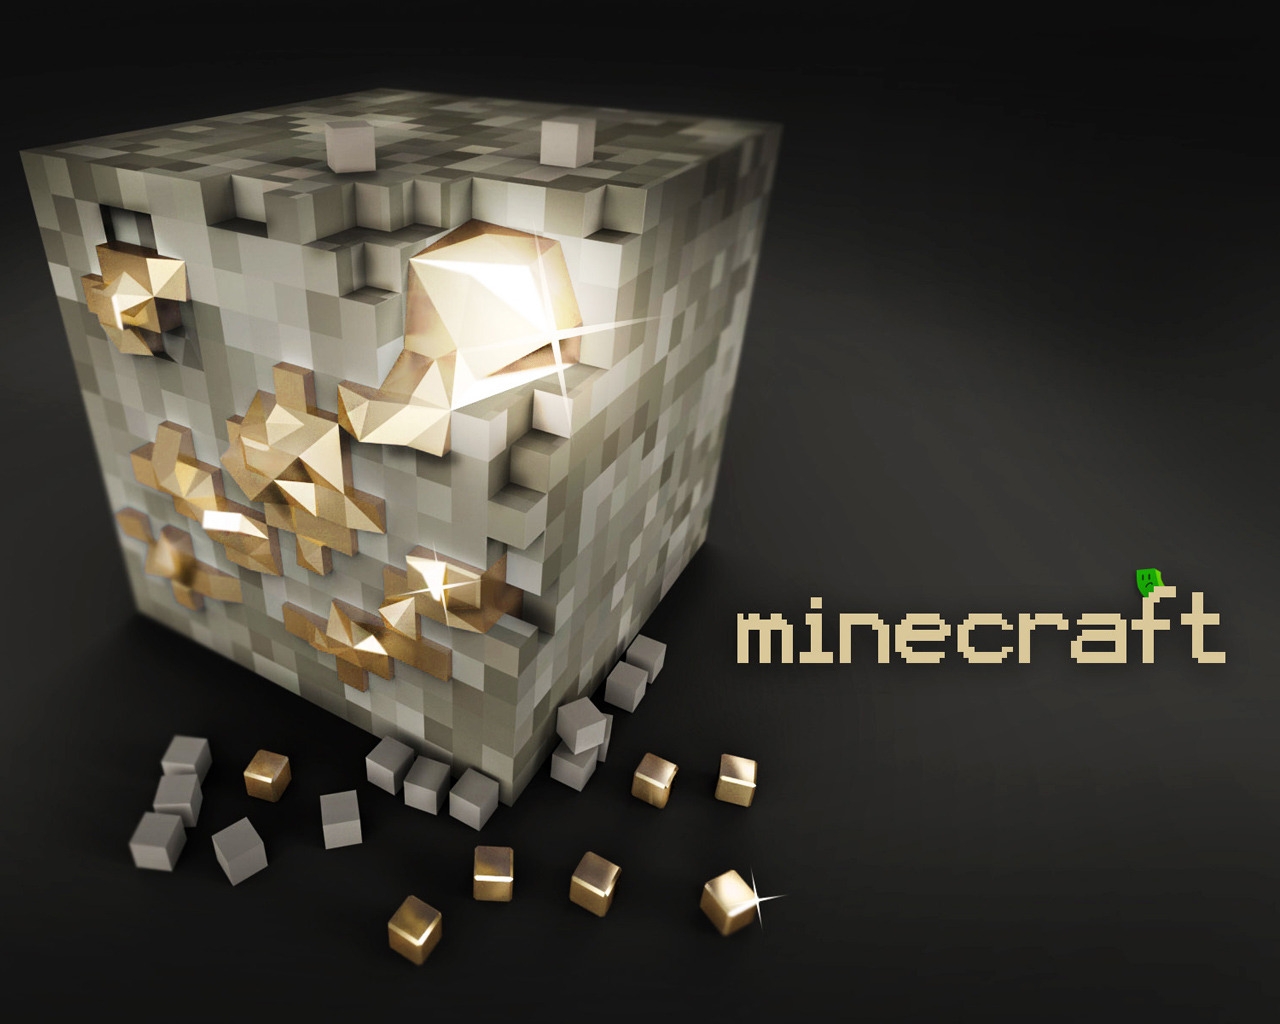 Minecraft Poster for 1280 x 1024 resolution